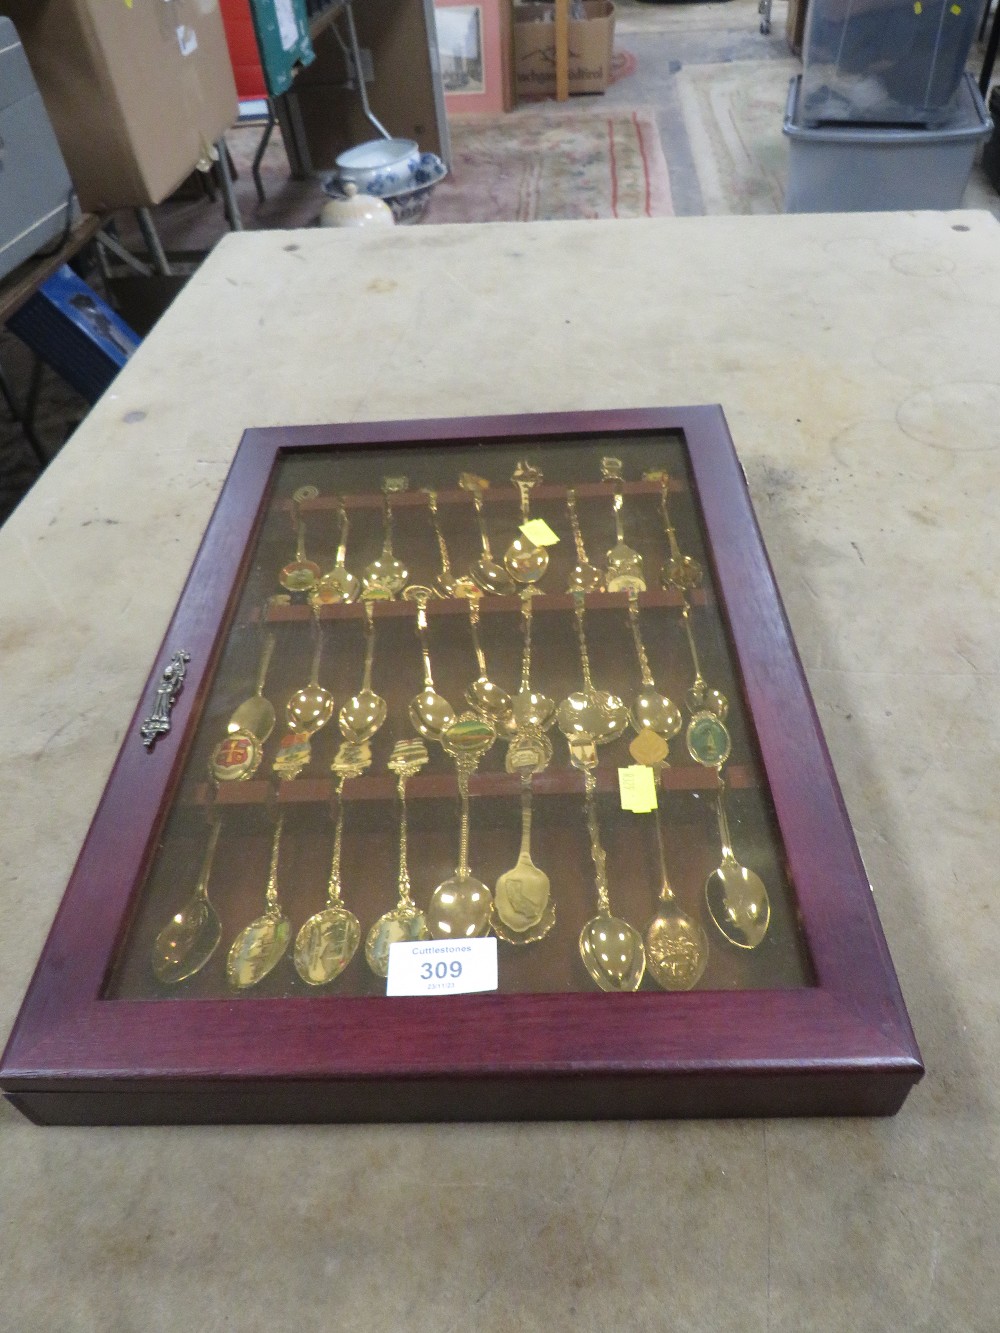 A DISPLAY CASE CONTAINING COLLECTORS SPOONS - Image 2 of 2